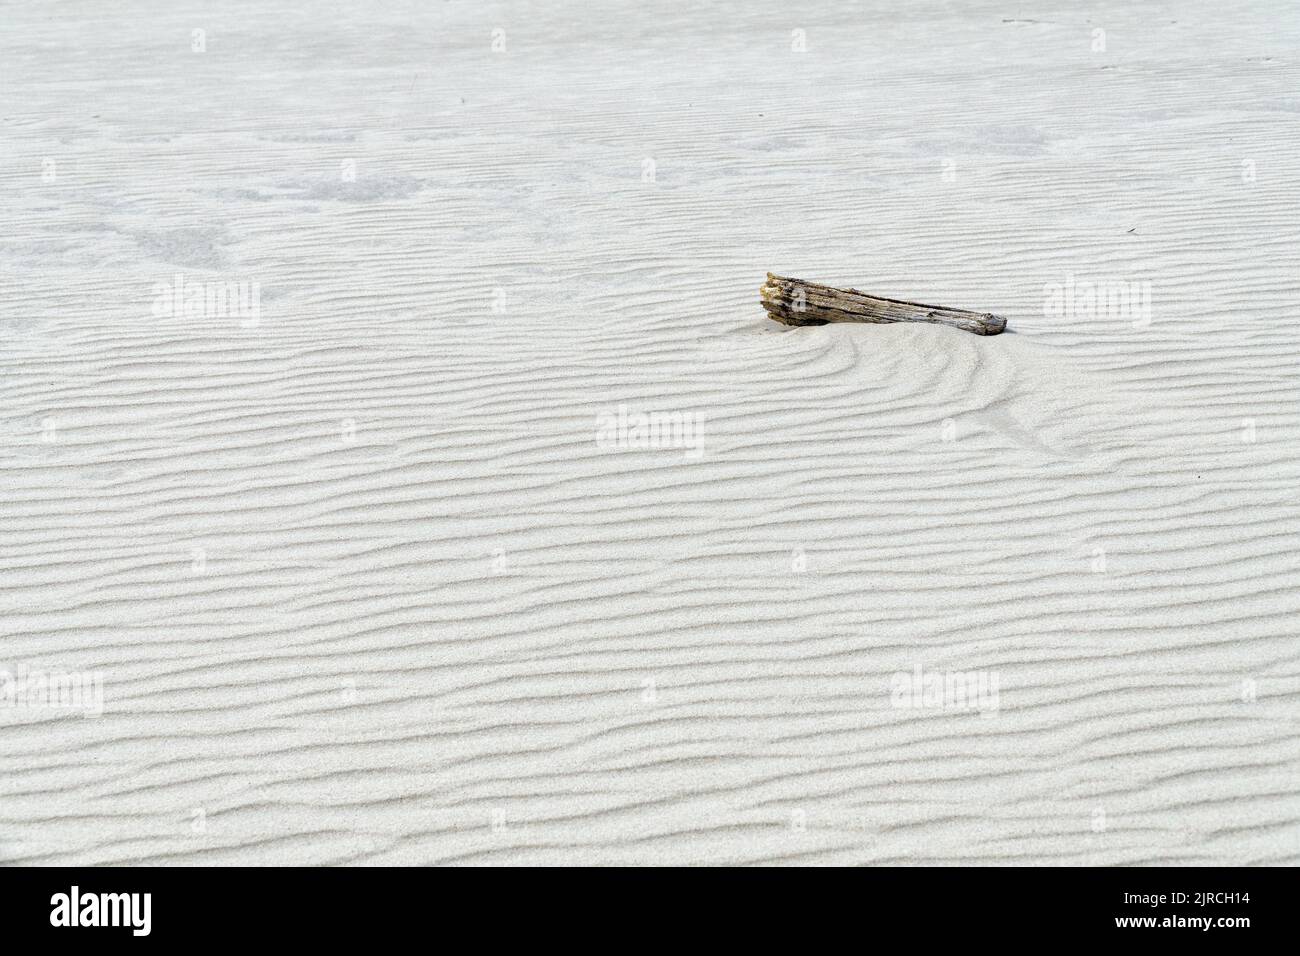 Tree trunk on the beach with rippled white sand. Natural, abstract background. Sand texture. Stock Photo